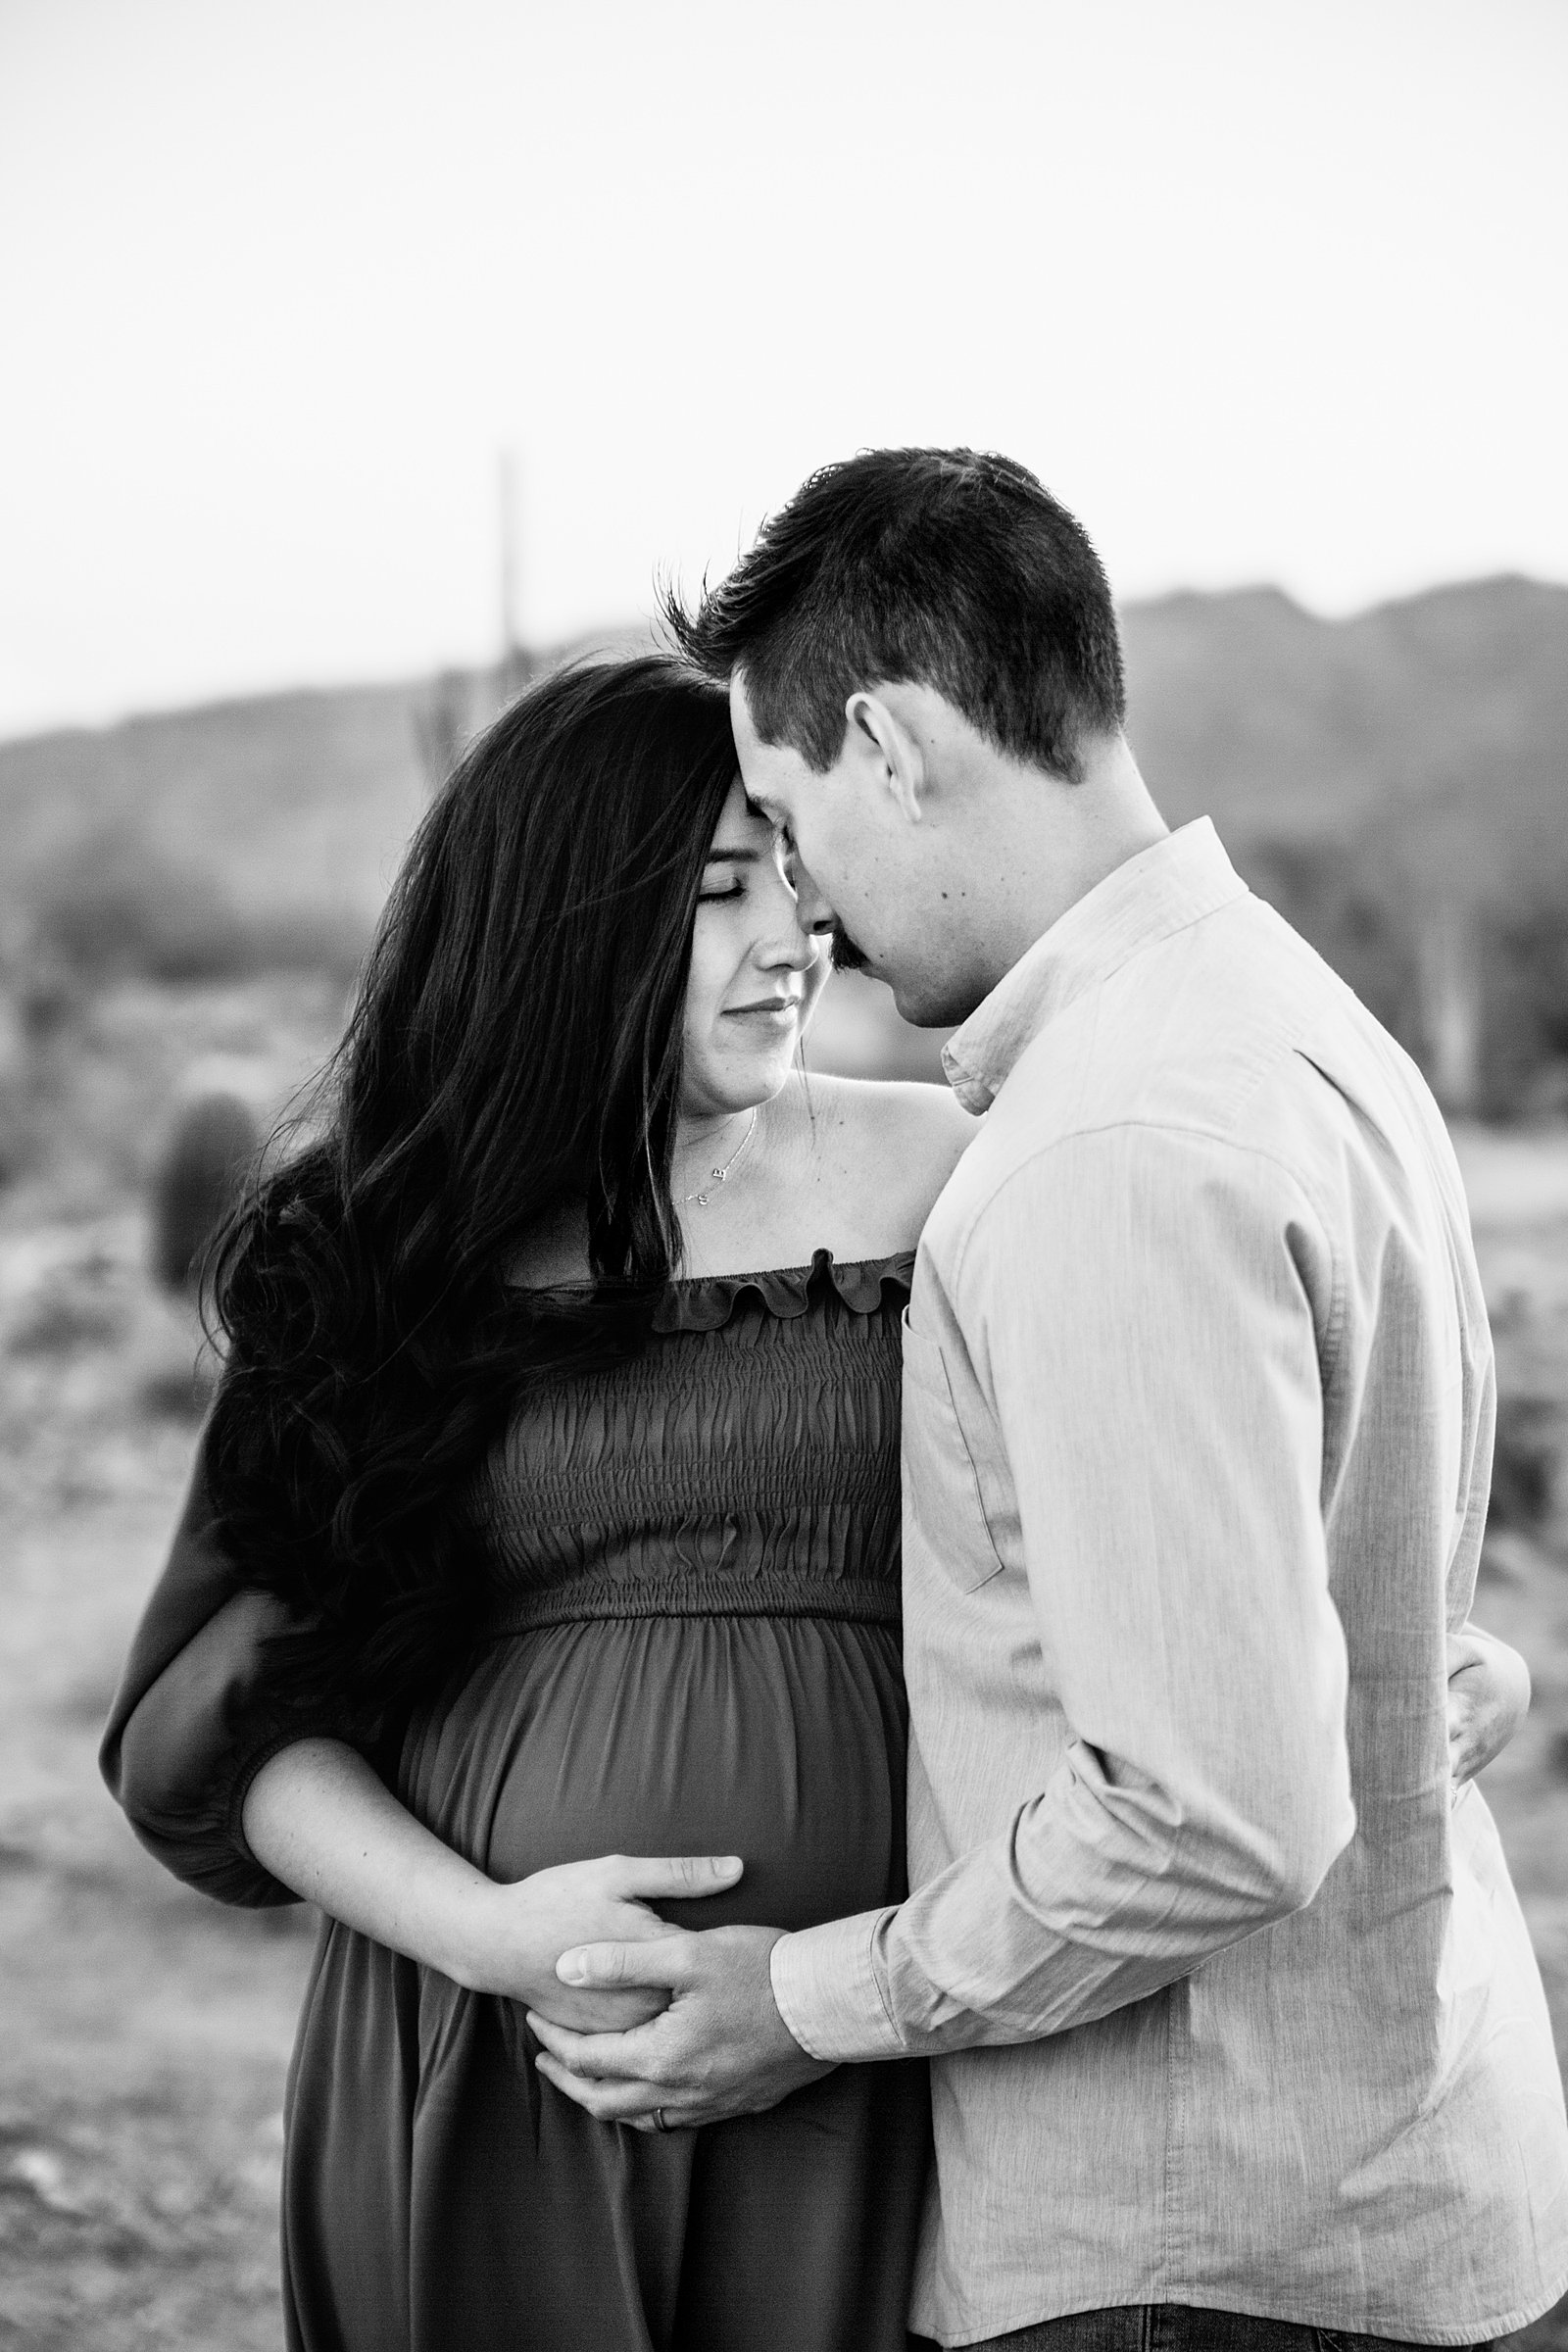 Couple share an intimate moment during their White Tanks maternity session by Phoenix engagement photographer PMA Photography.